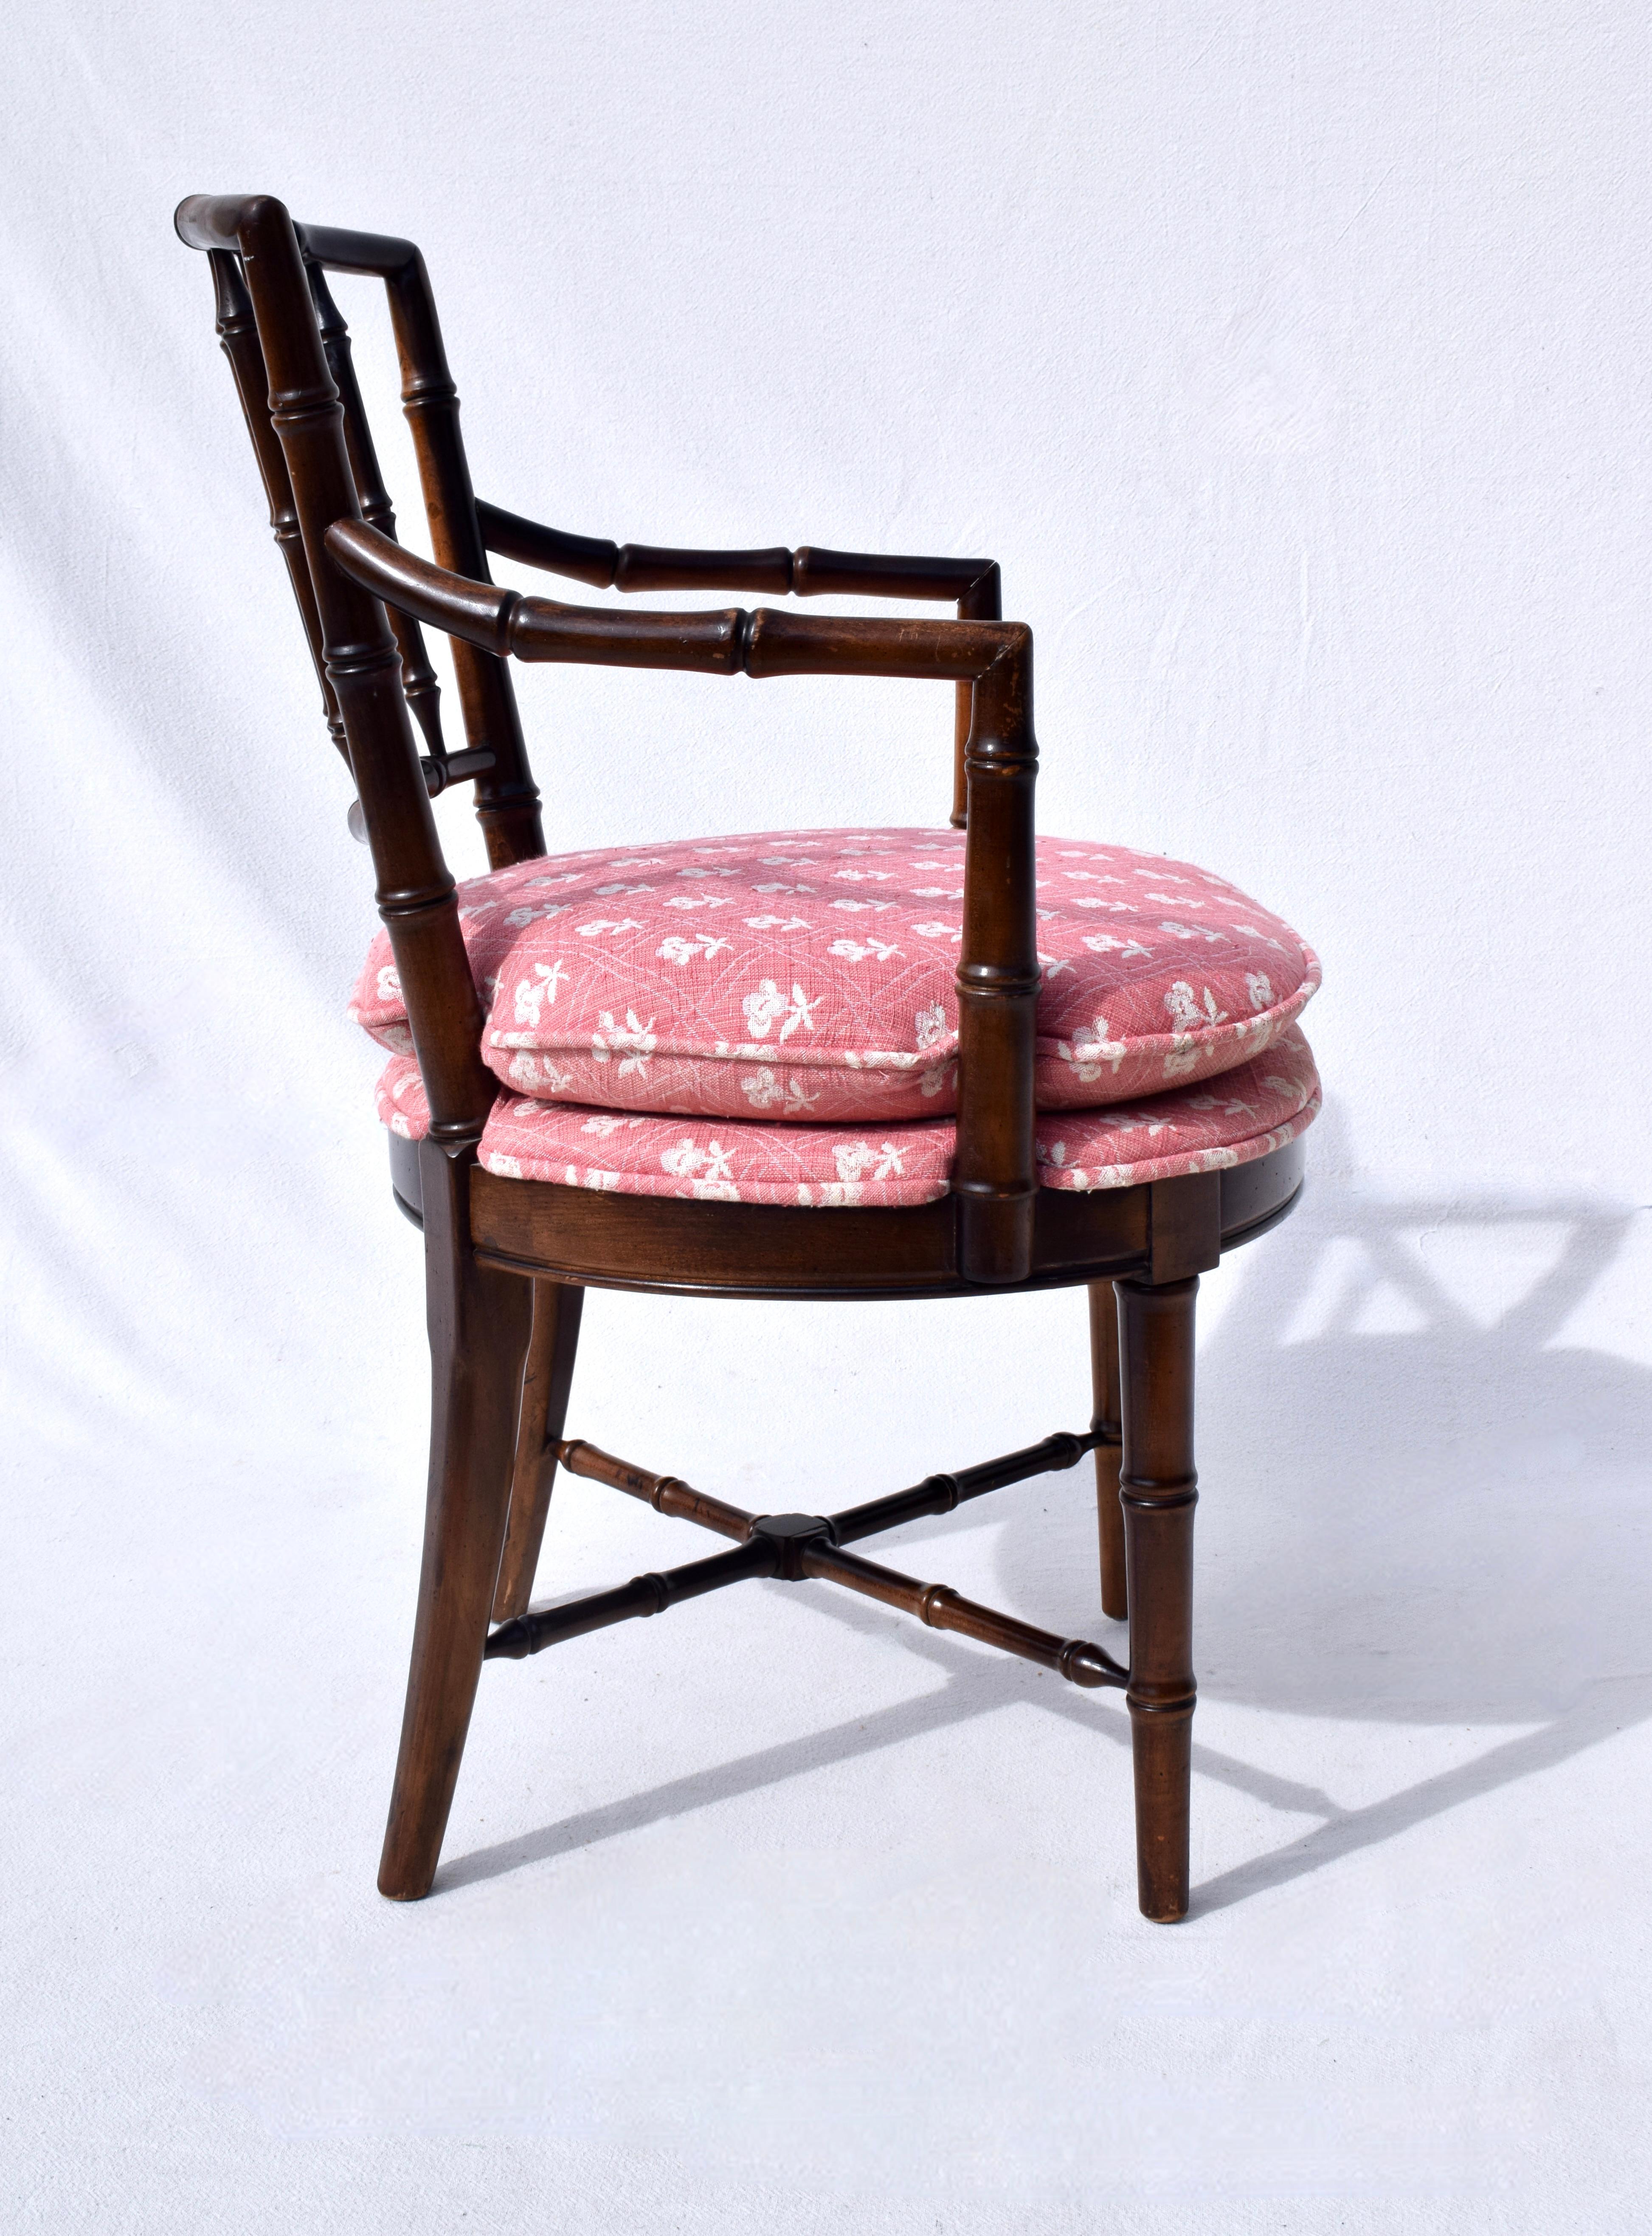 20th Century Faux Bamboo Arm Chair in Brunschwig & Fils by Drexel Heritage  For Sale